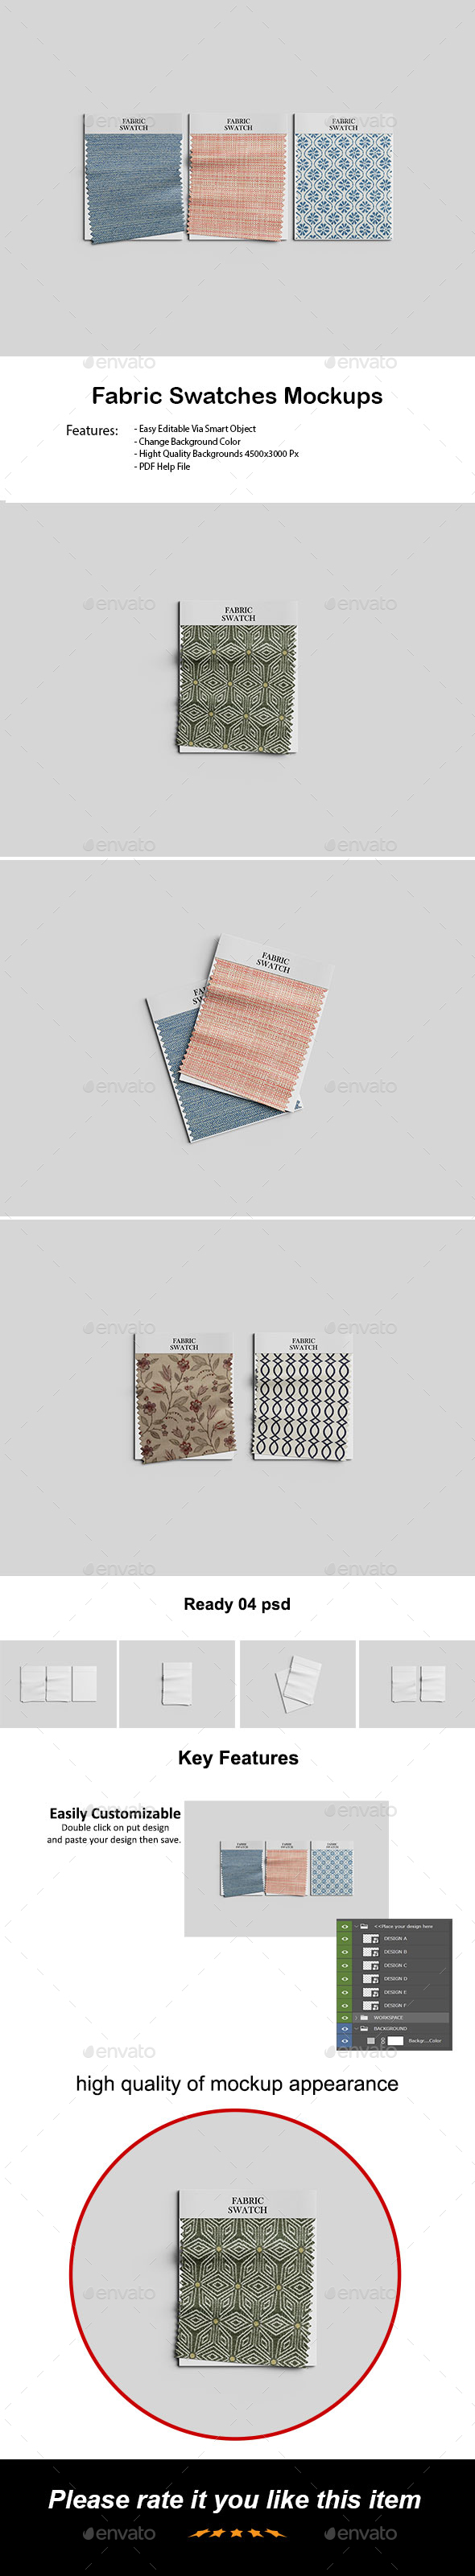 Fabric Swatches Mockups